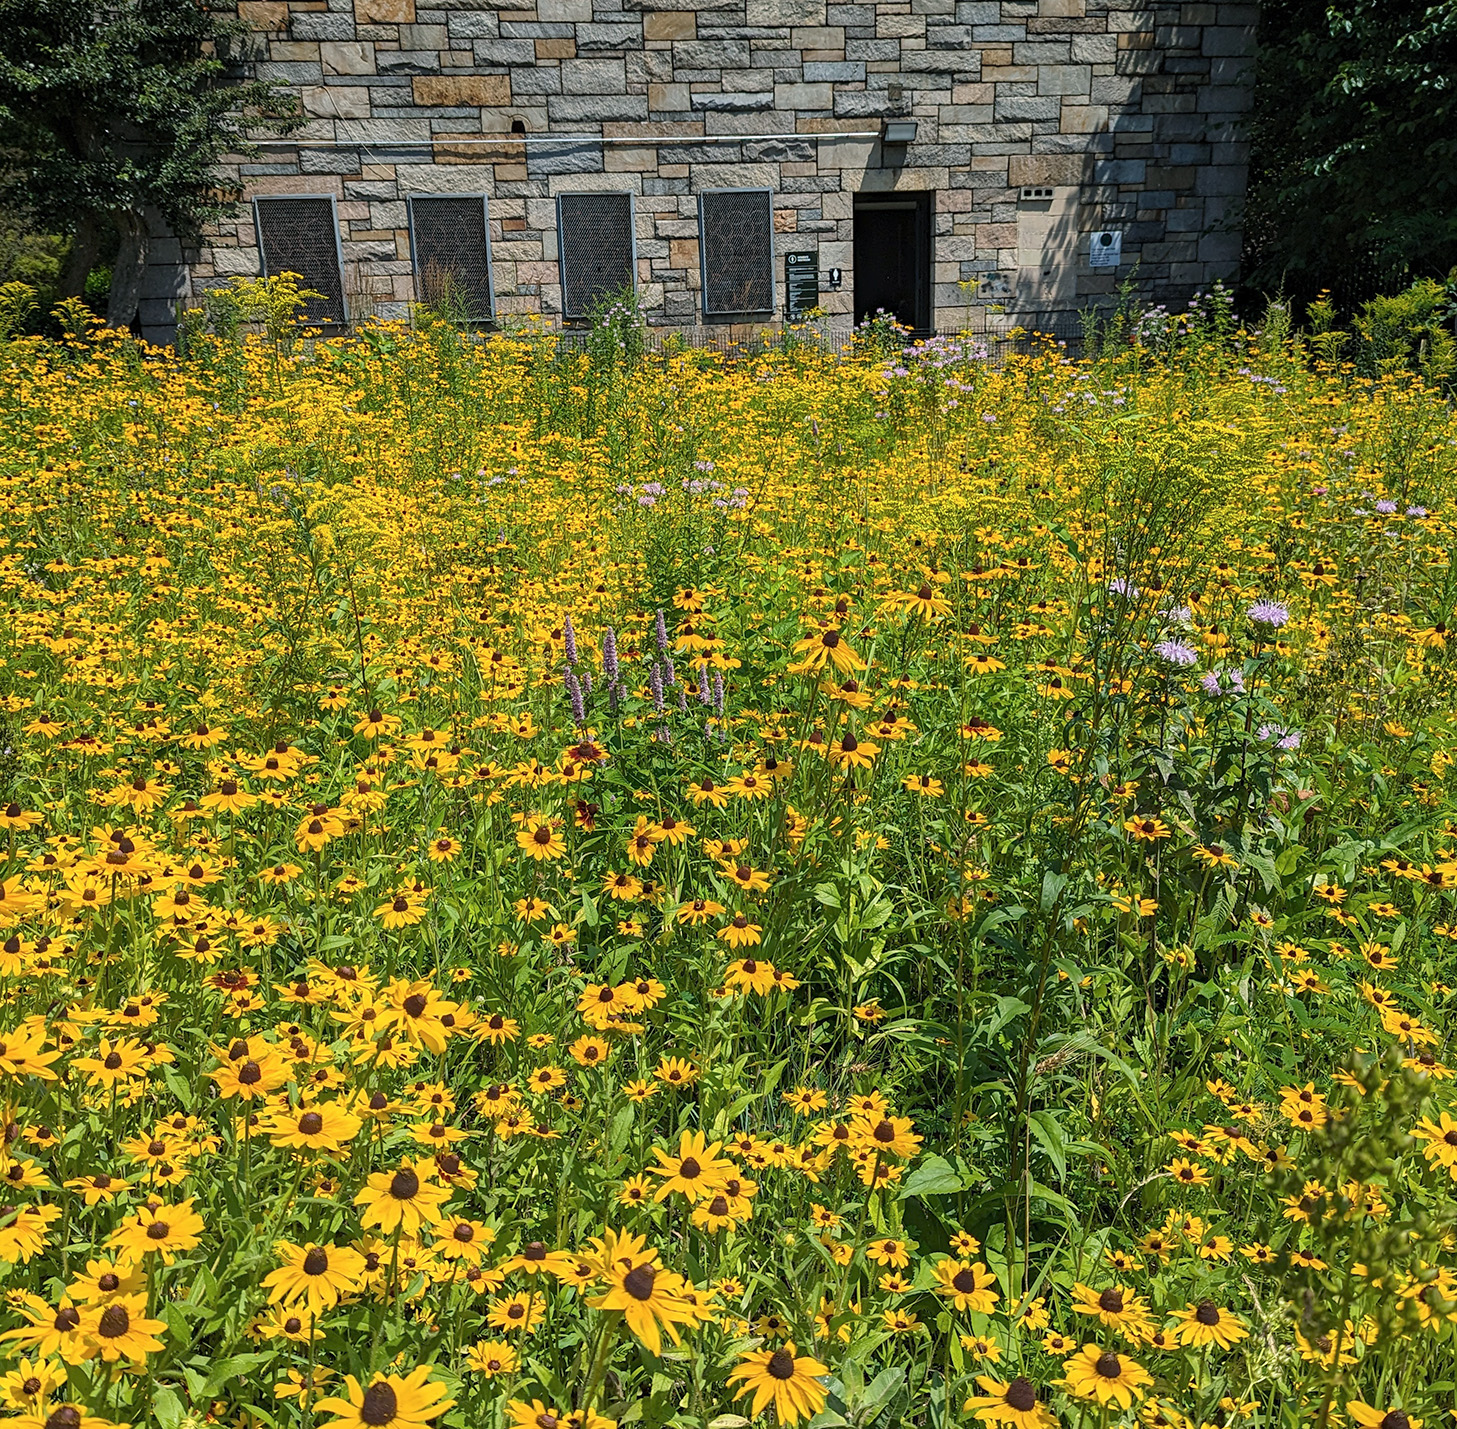 A thick layer of vibrant yellow flowers in the summer noon sun. A grey-brick building in the background.